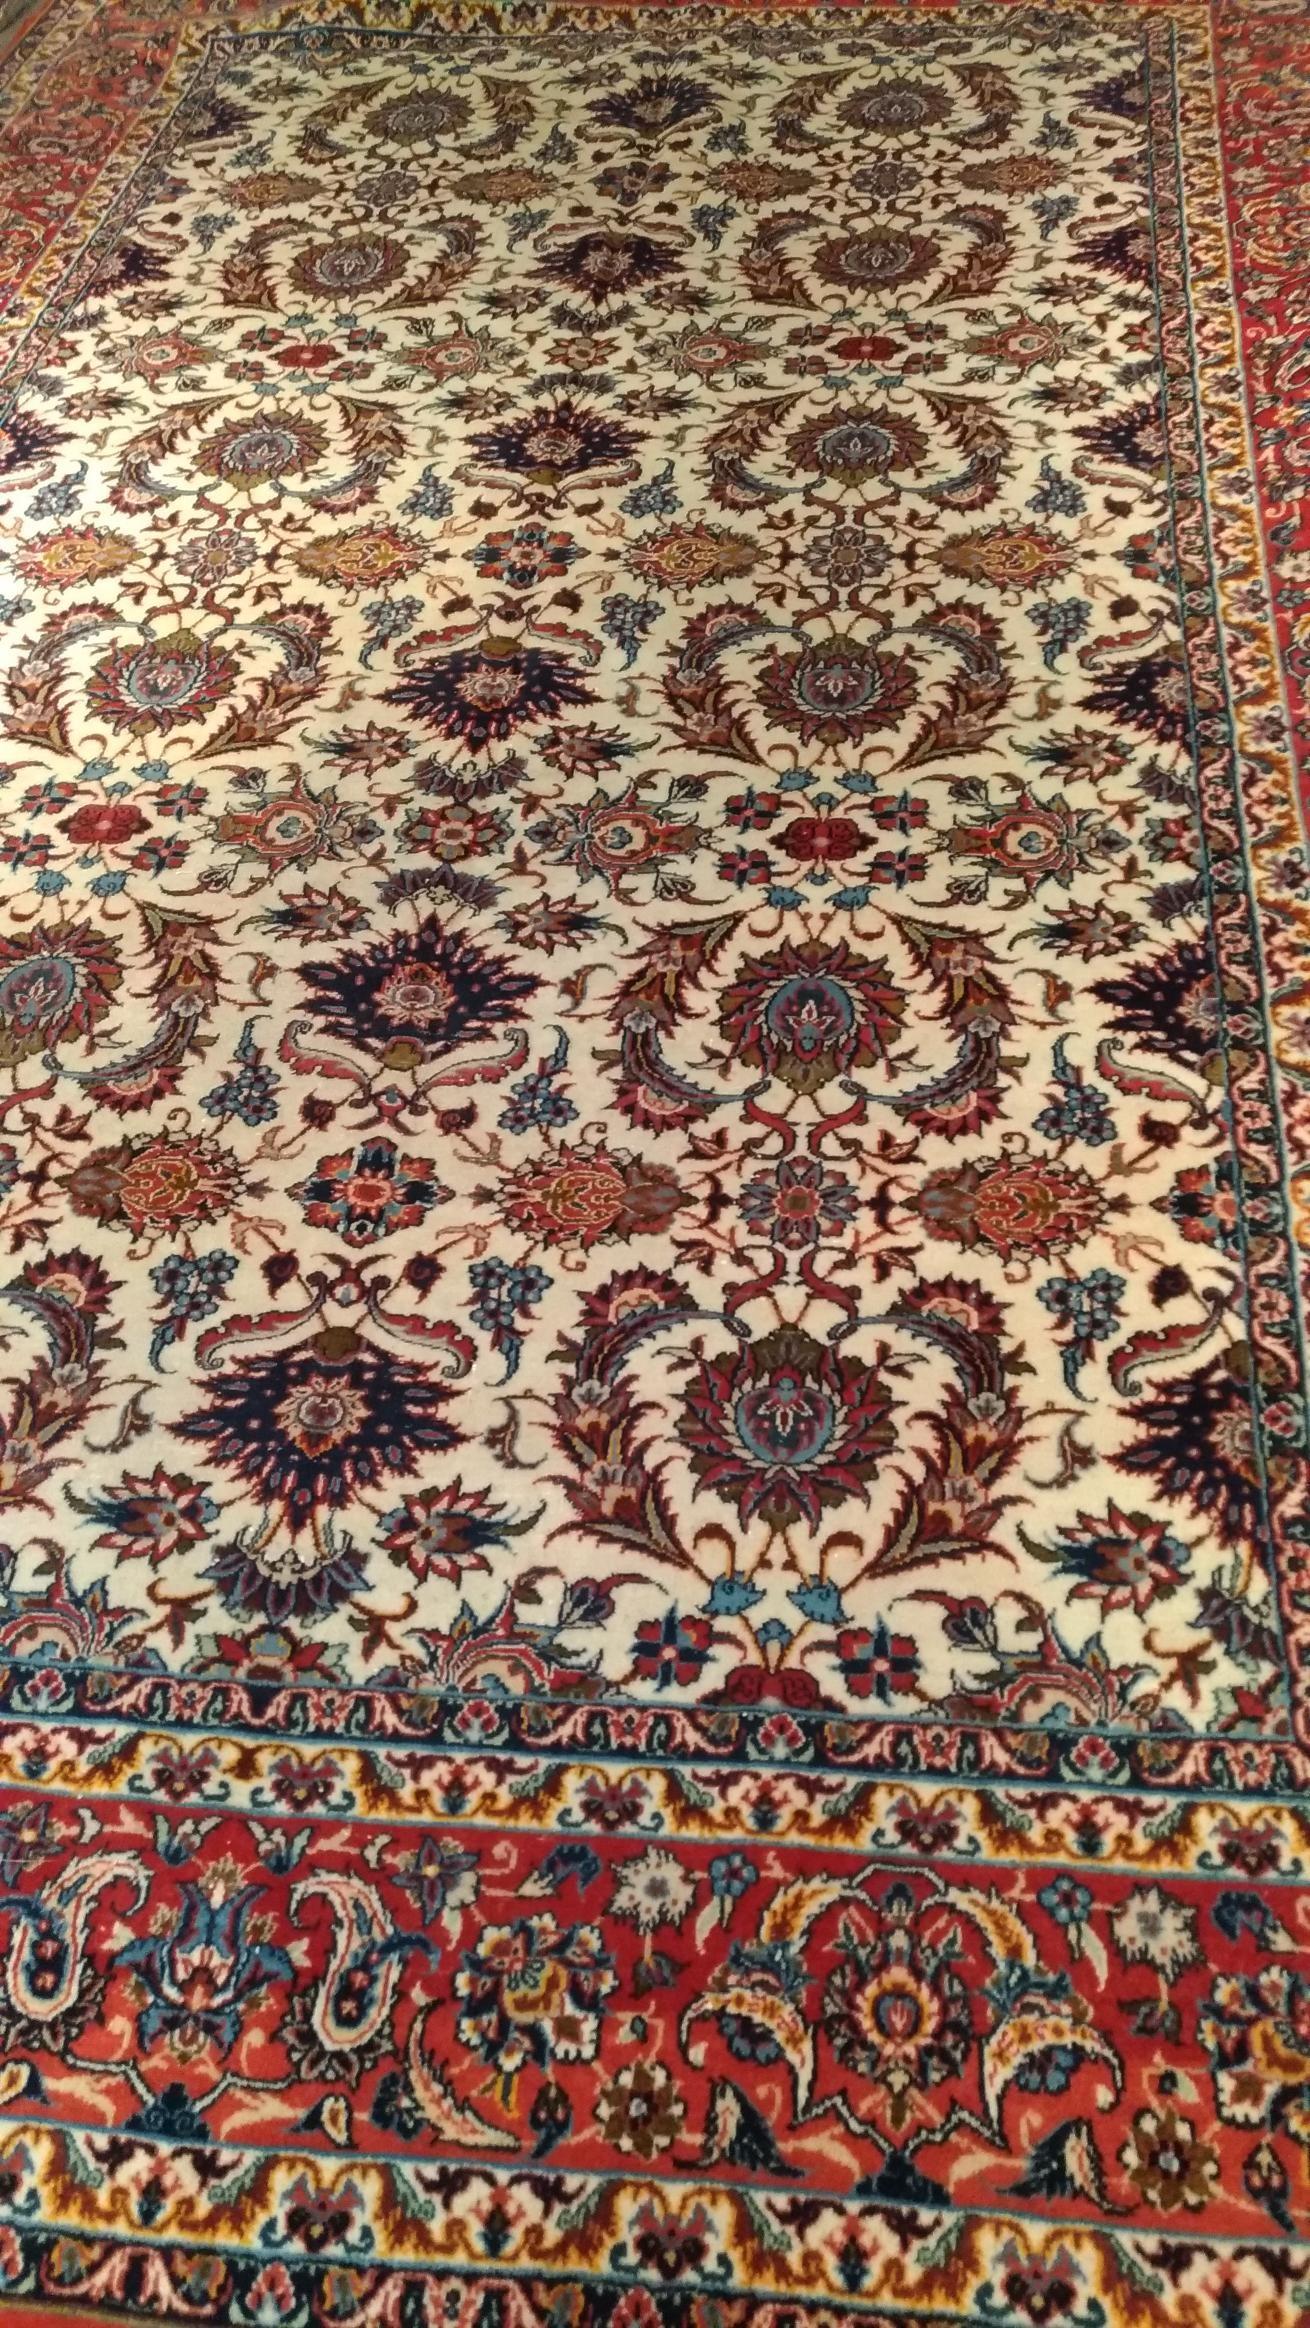 Central Asian 1018 - Beautiful Very Fine Isfahan Carpet, Hand-Knotted For Sale